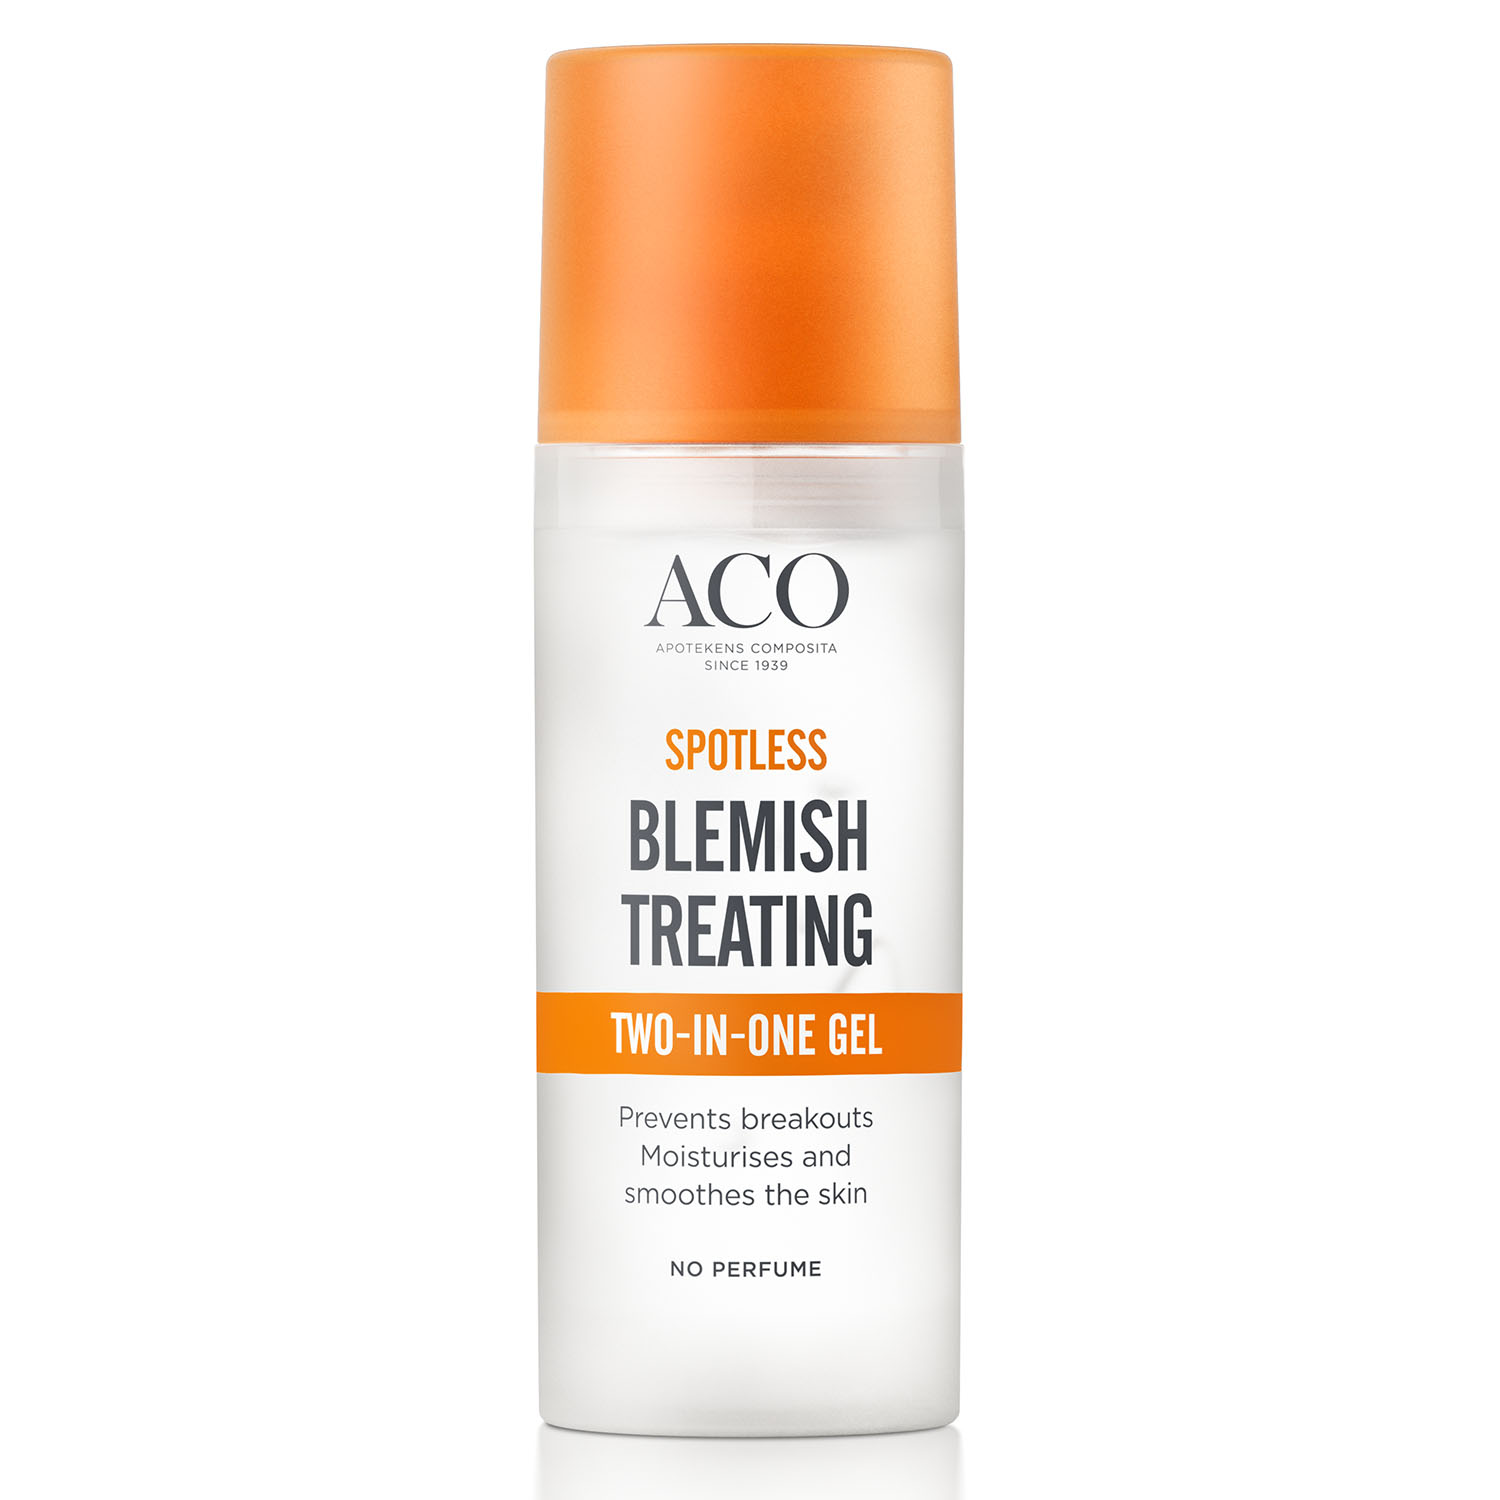 Spotless Blemish Treating Two-in-One Gel, 50 ml